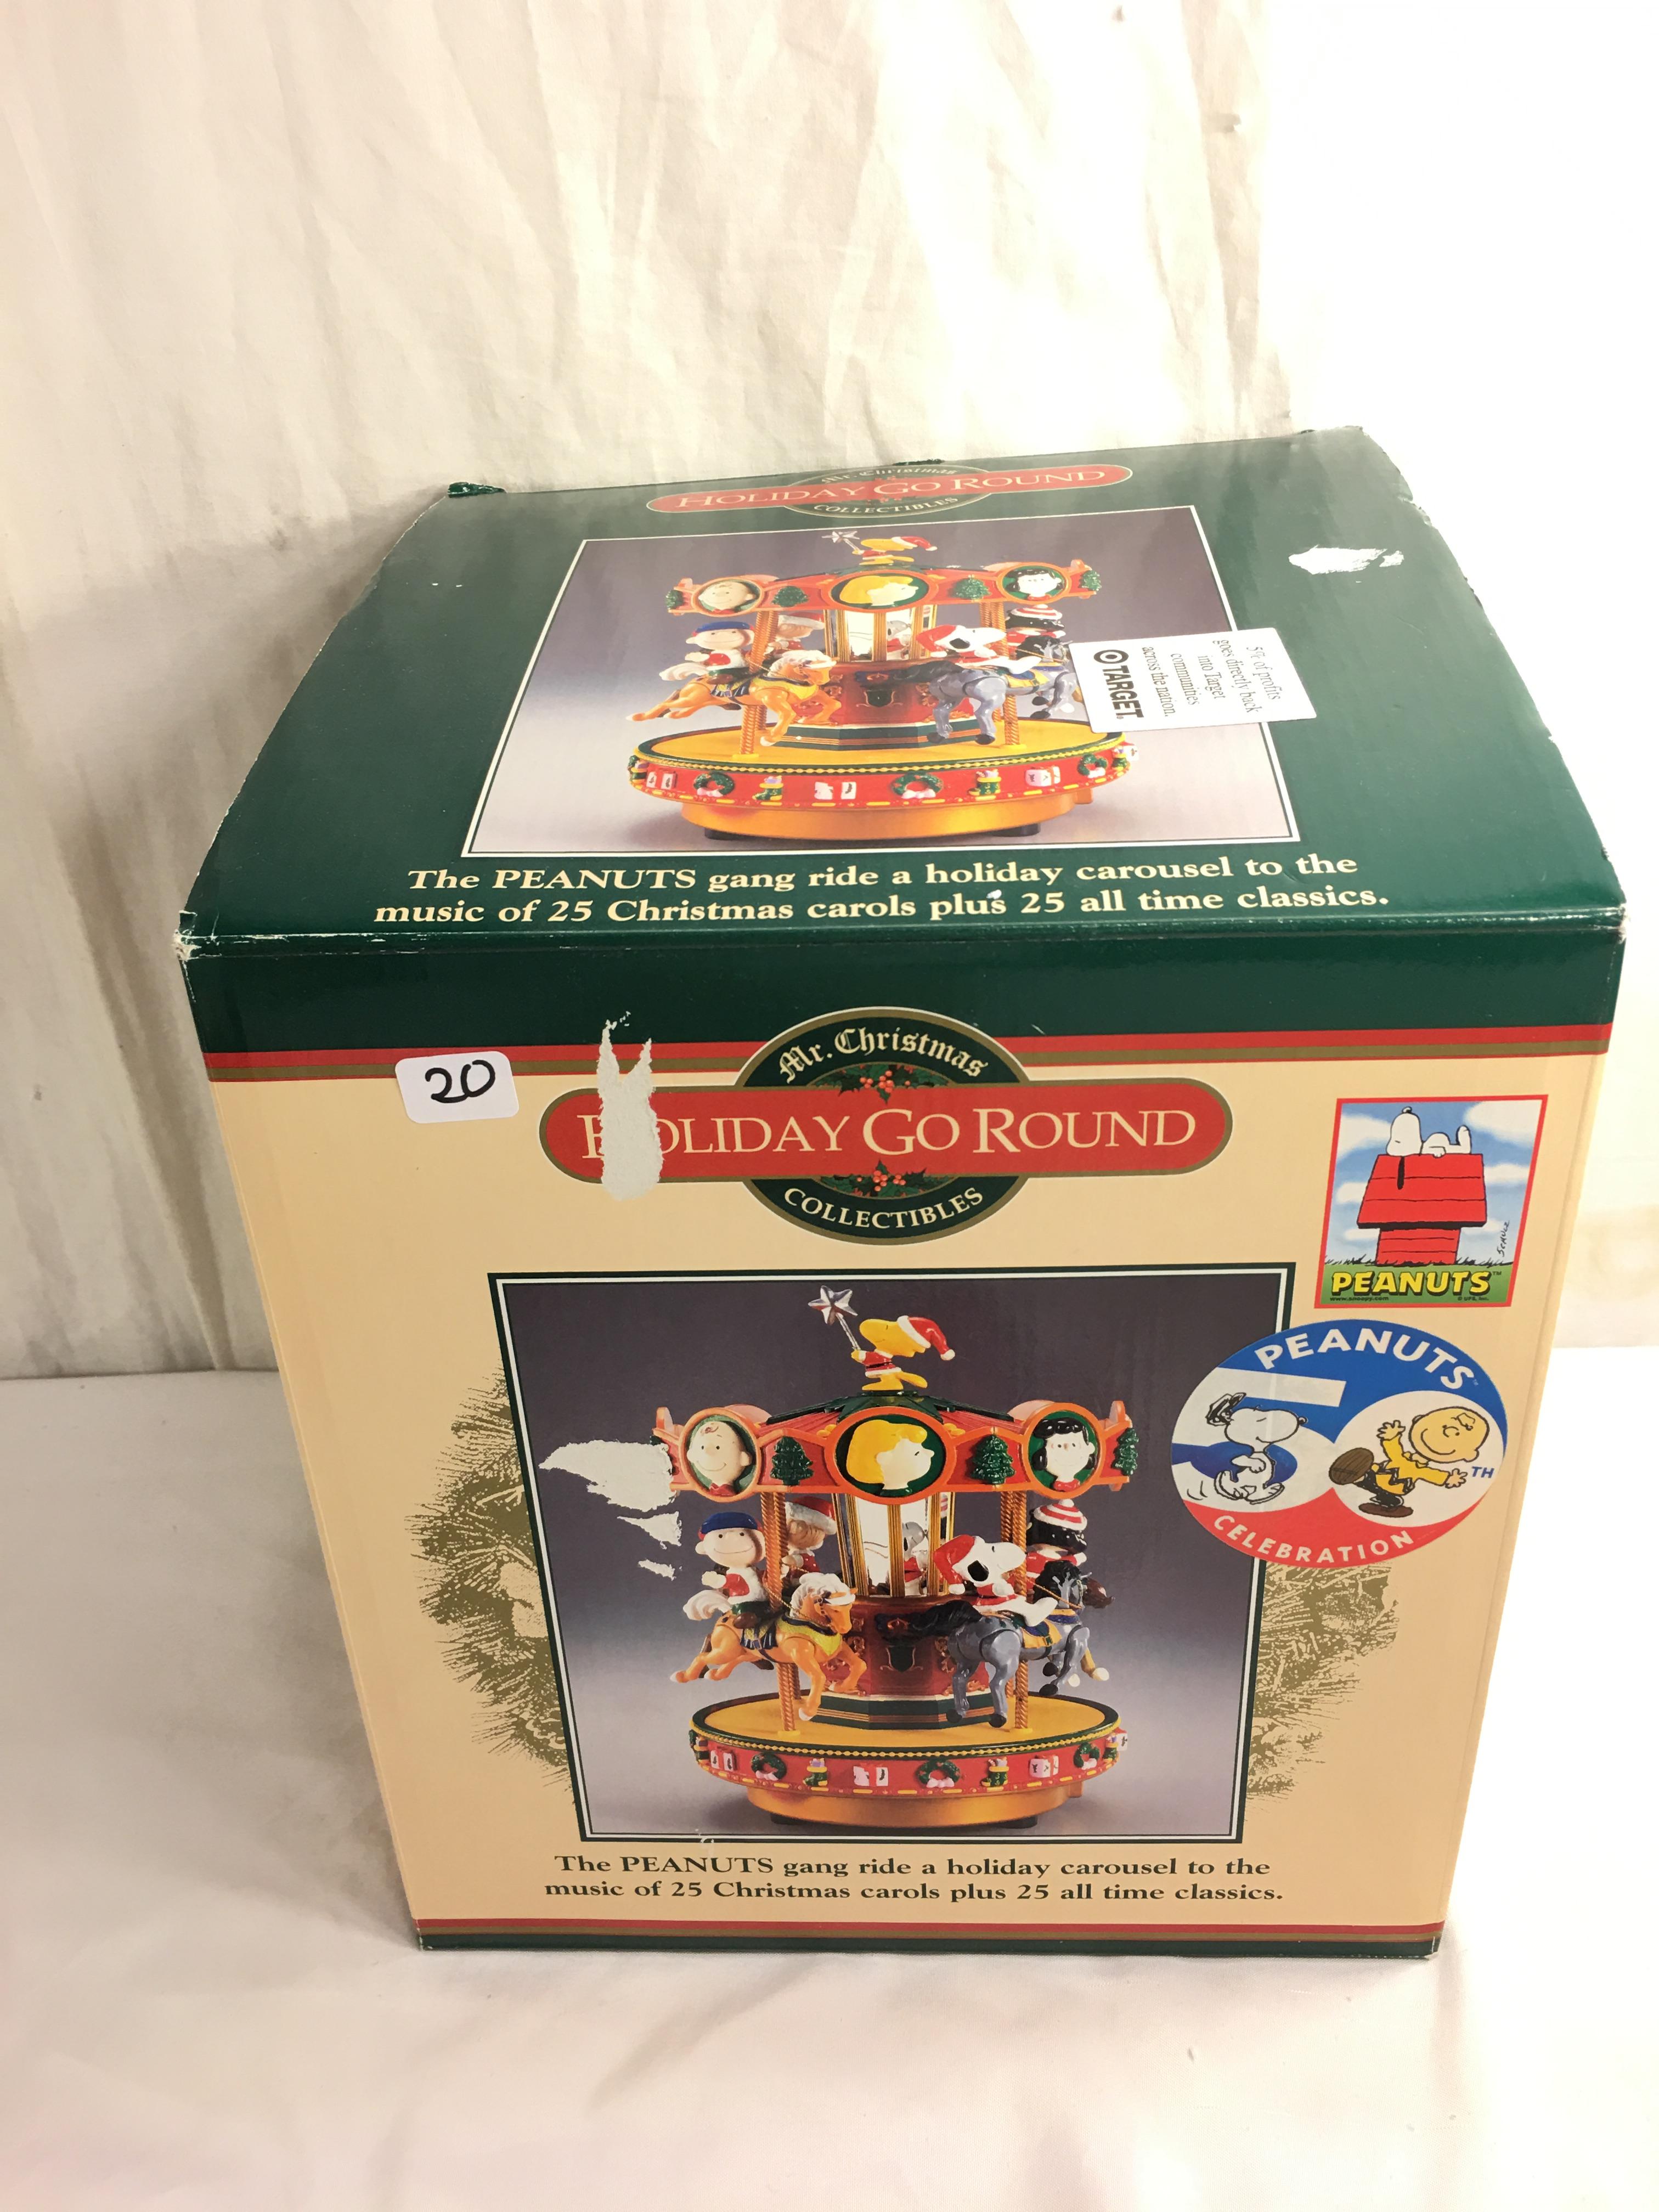 Collector Peanuts Holiday Go Round Mr. Christmas collectibles Box Size:10'tall by 9" Width